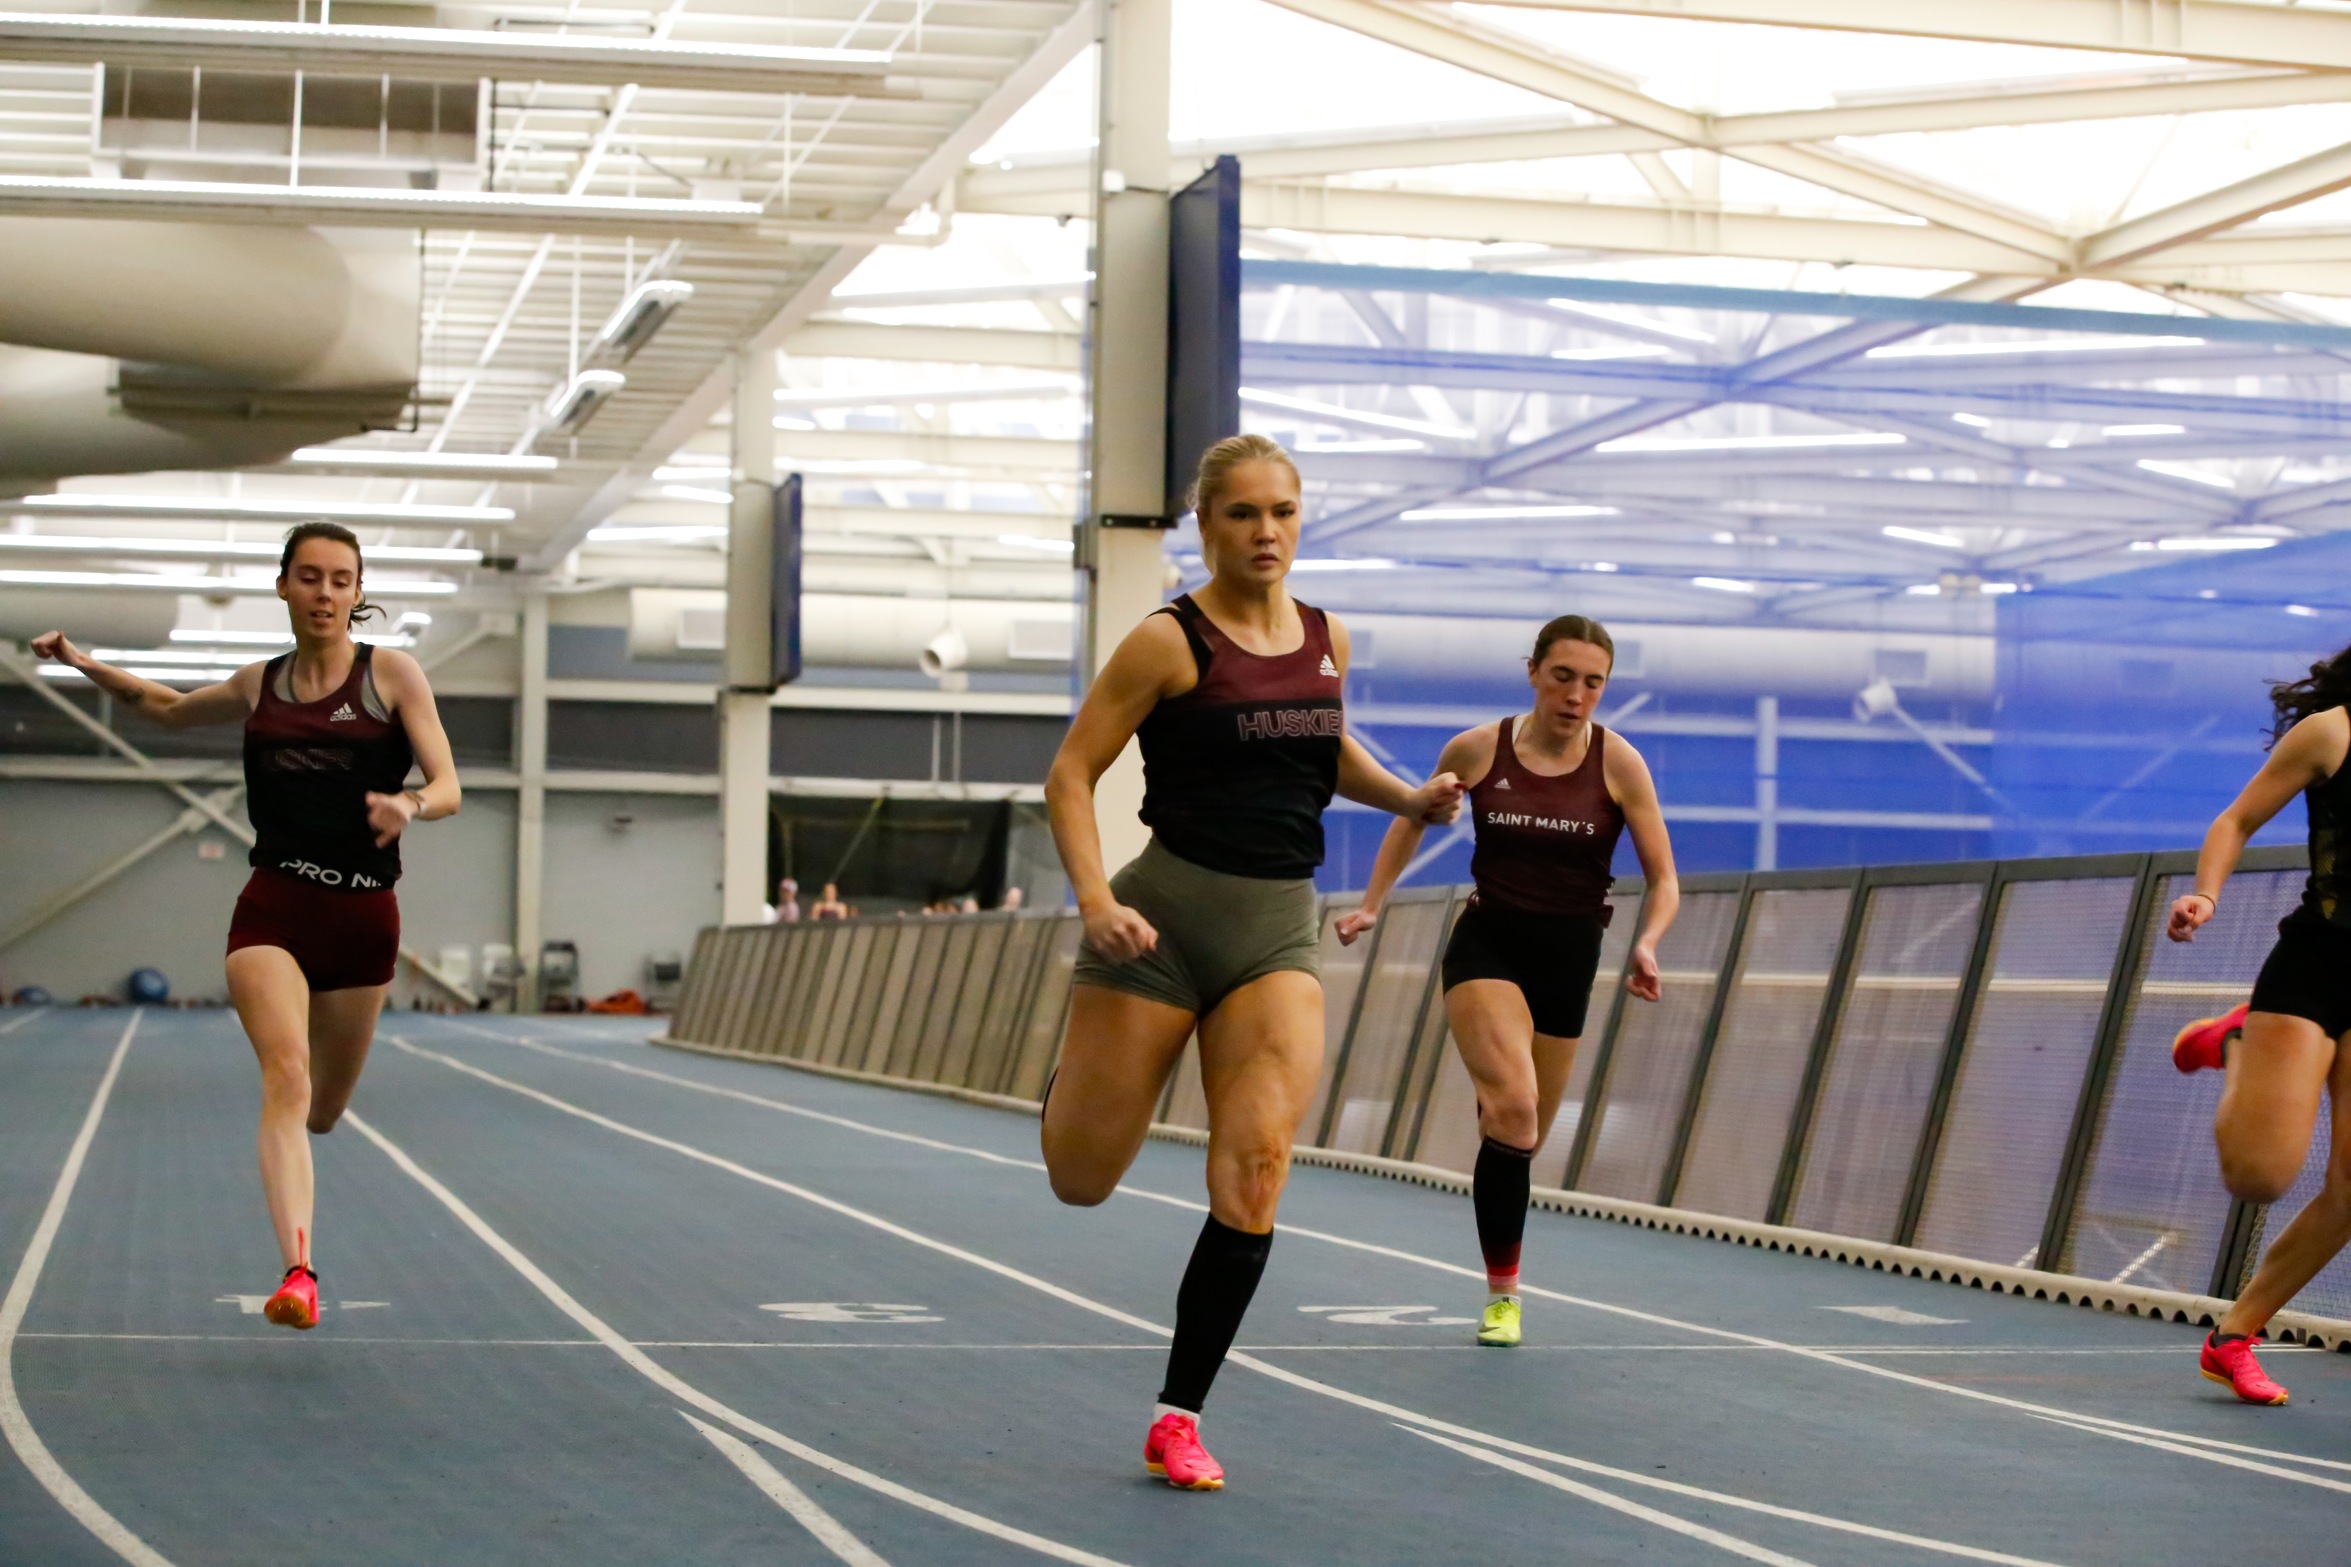 Huskies Track & Field have first taste of competition at SMU/DAL Mini Meet